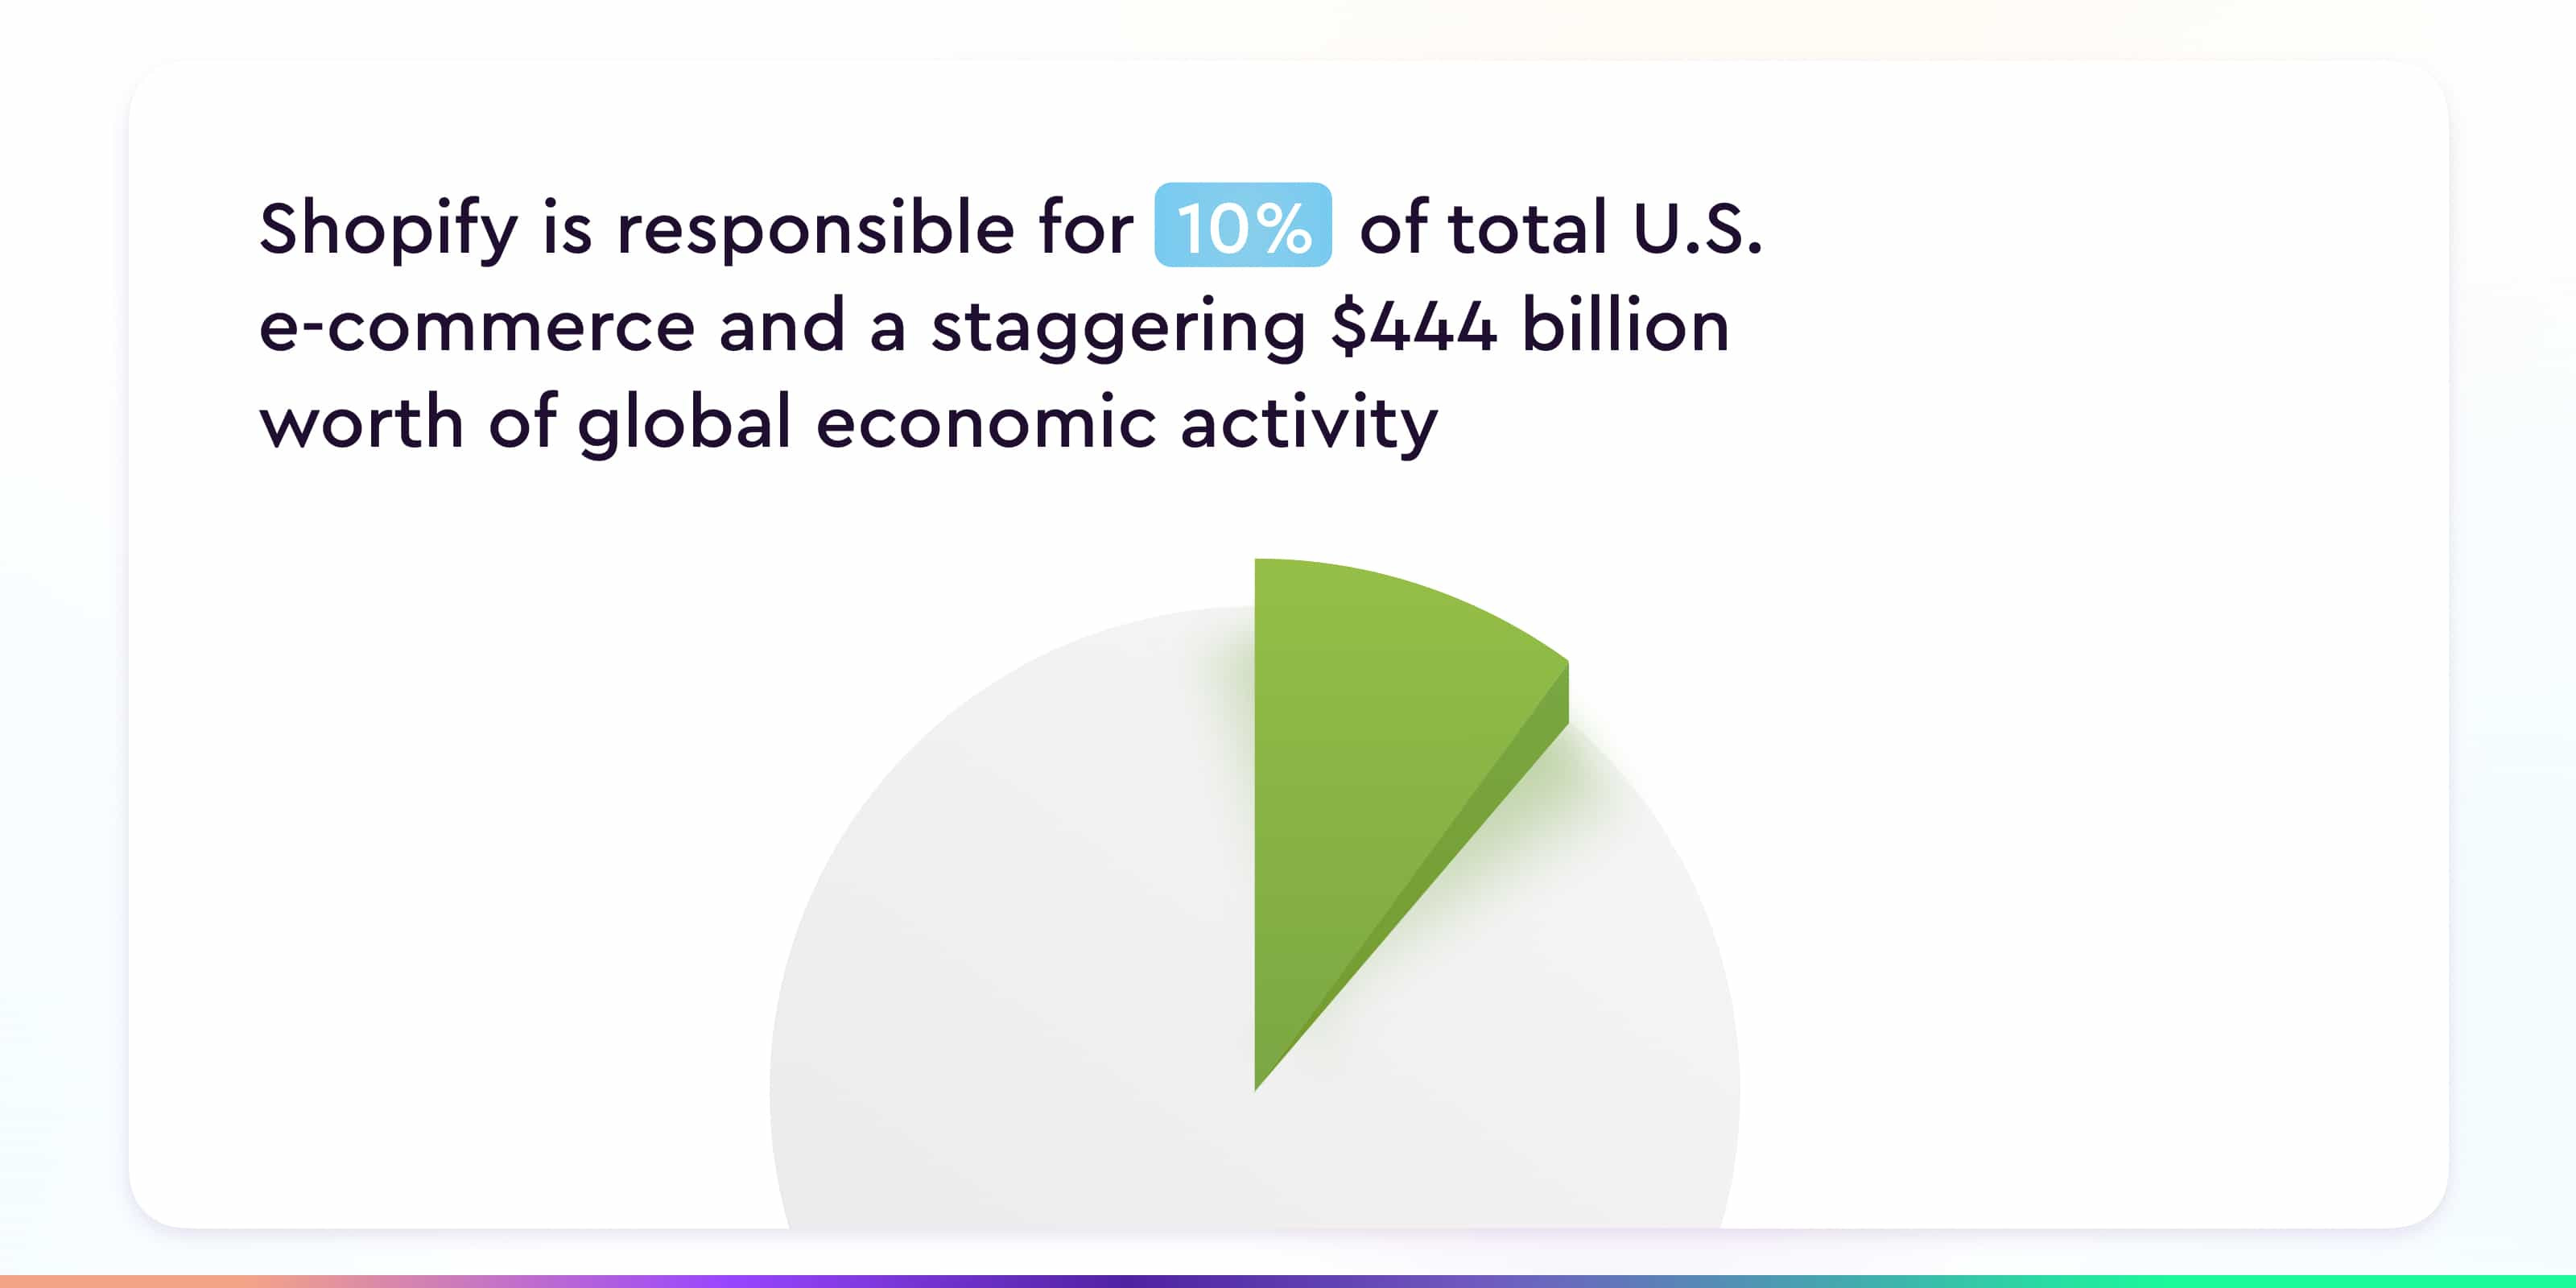 Shopify's e-commerce share & global activity